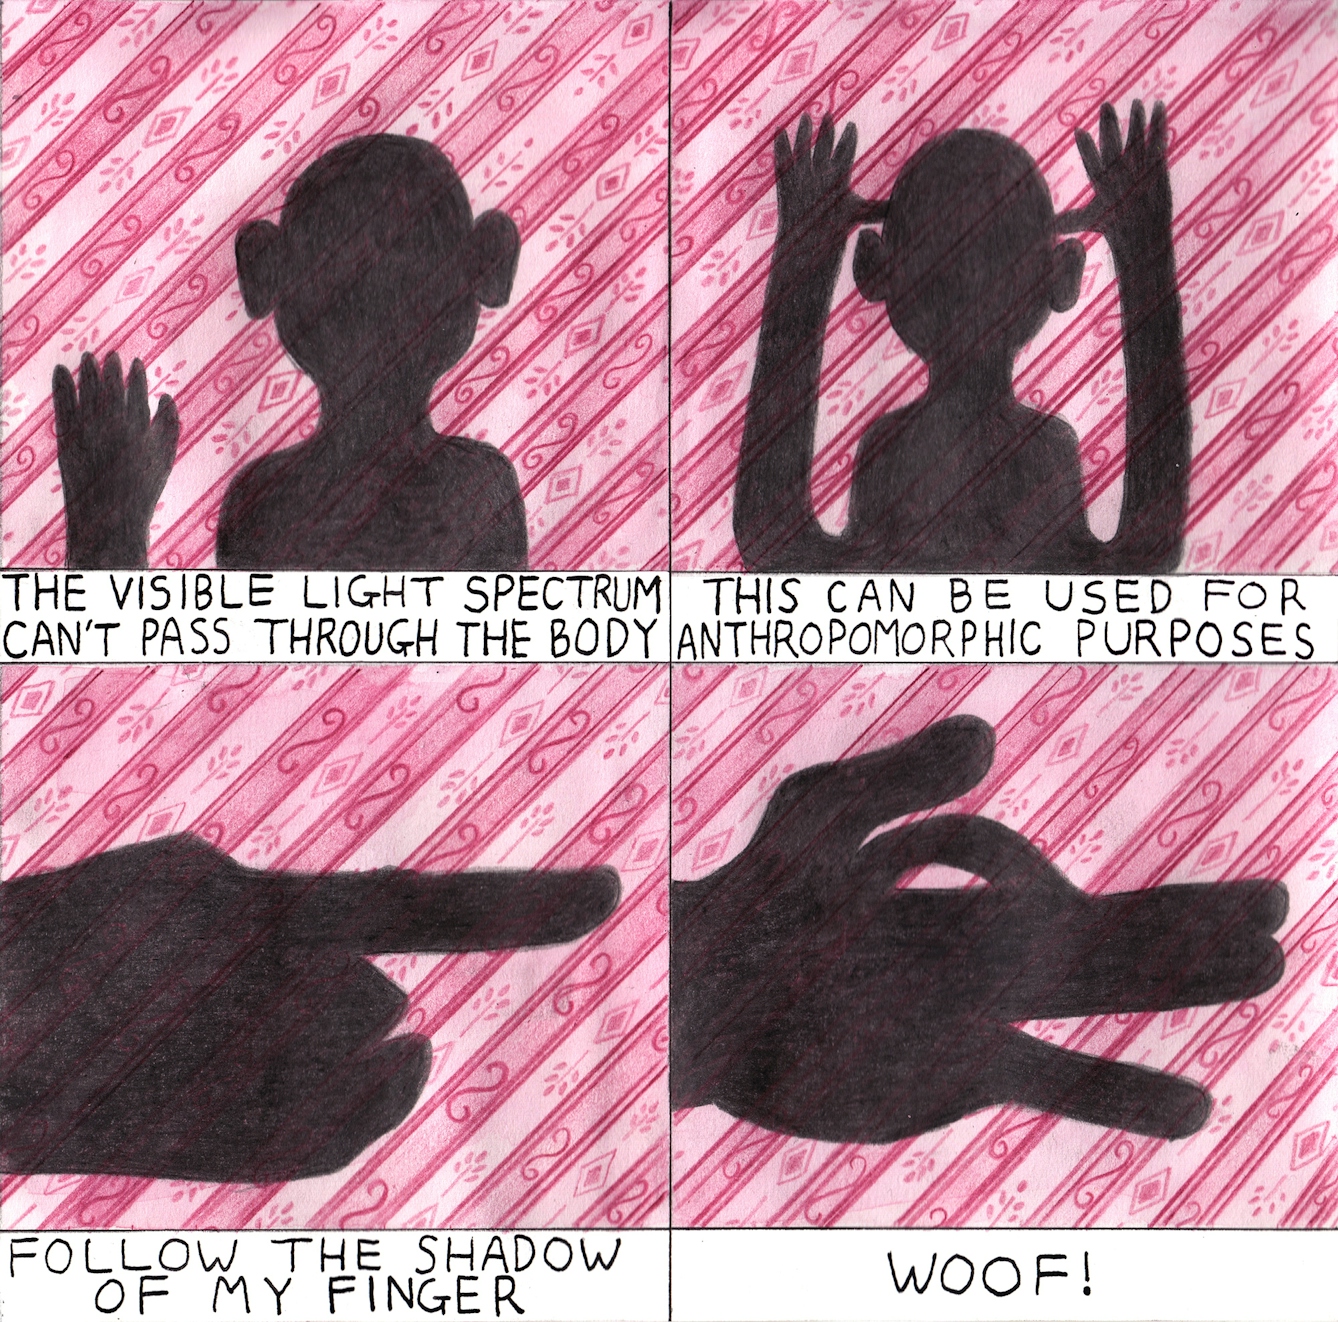 The visible light spectrum can't pass through the body. This can be used for anthropomorphic purposes. Follow the shape of my finger. Woof!